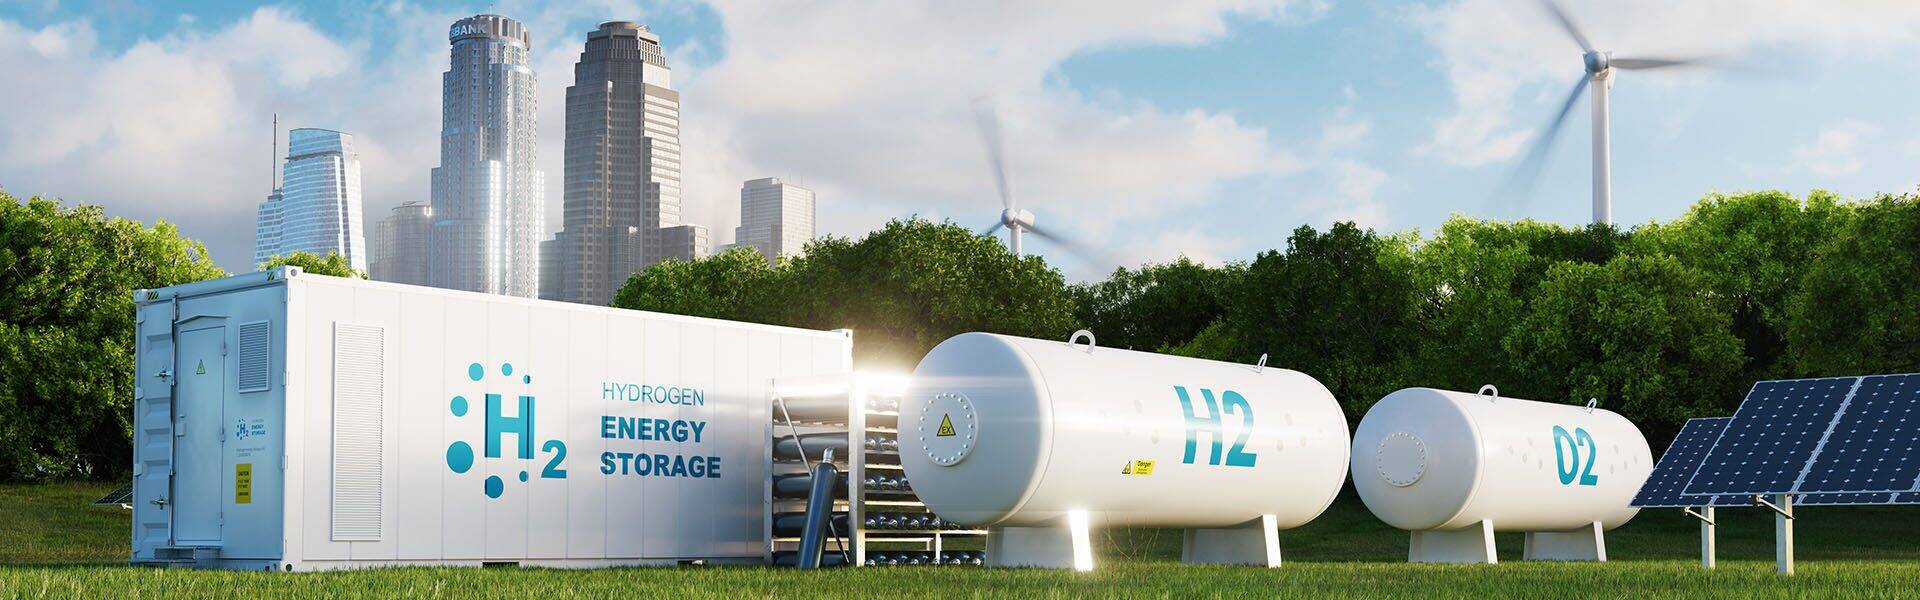 ITM Power wins funding to investigate hydrogen injection to gas grid